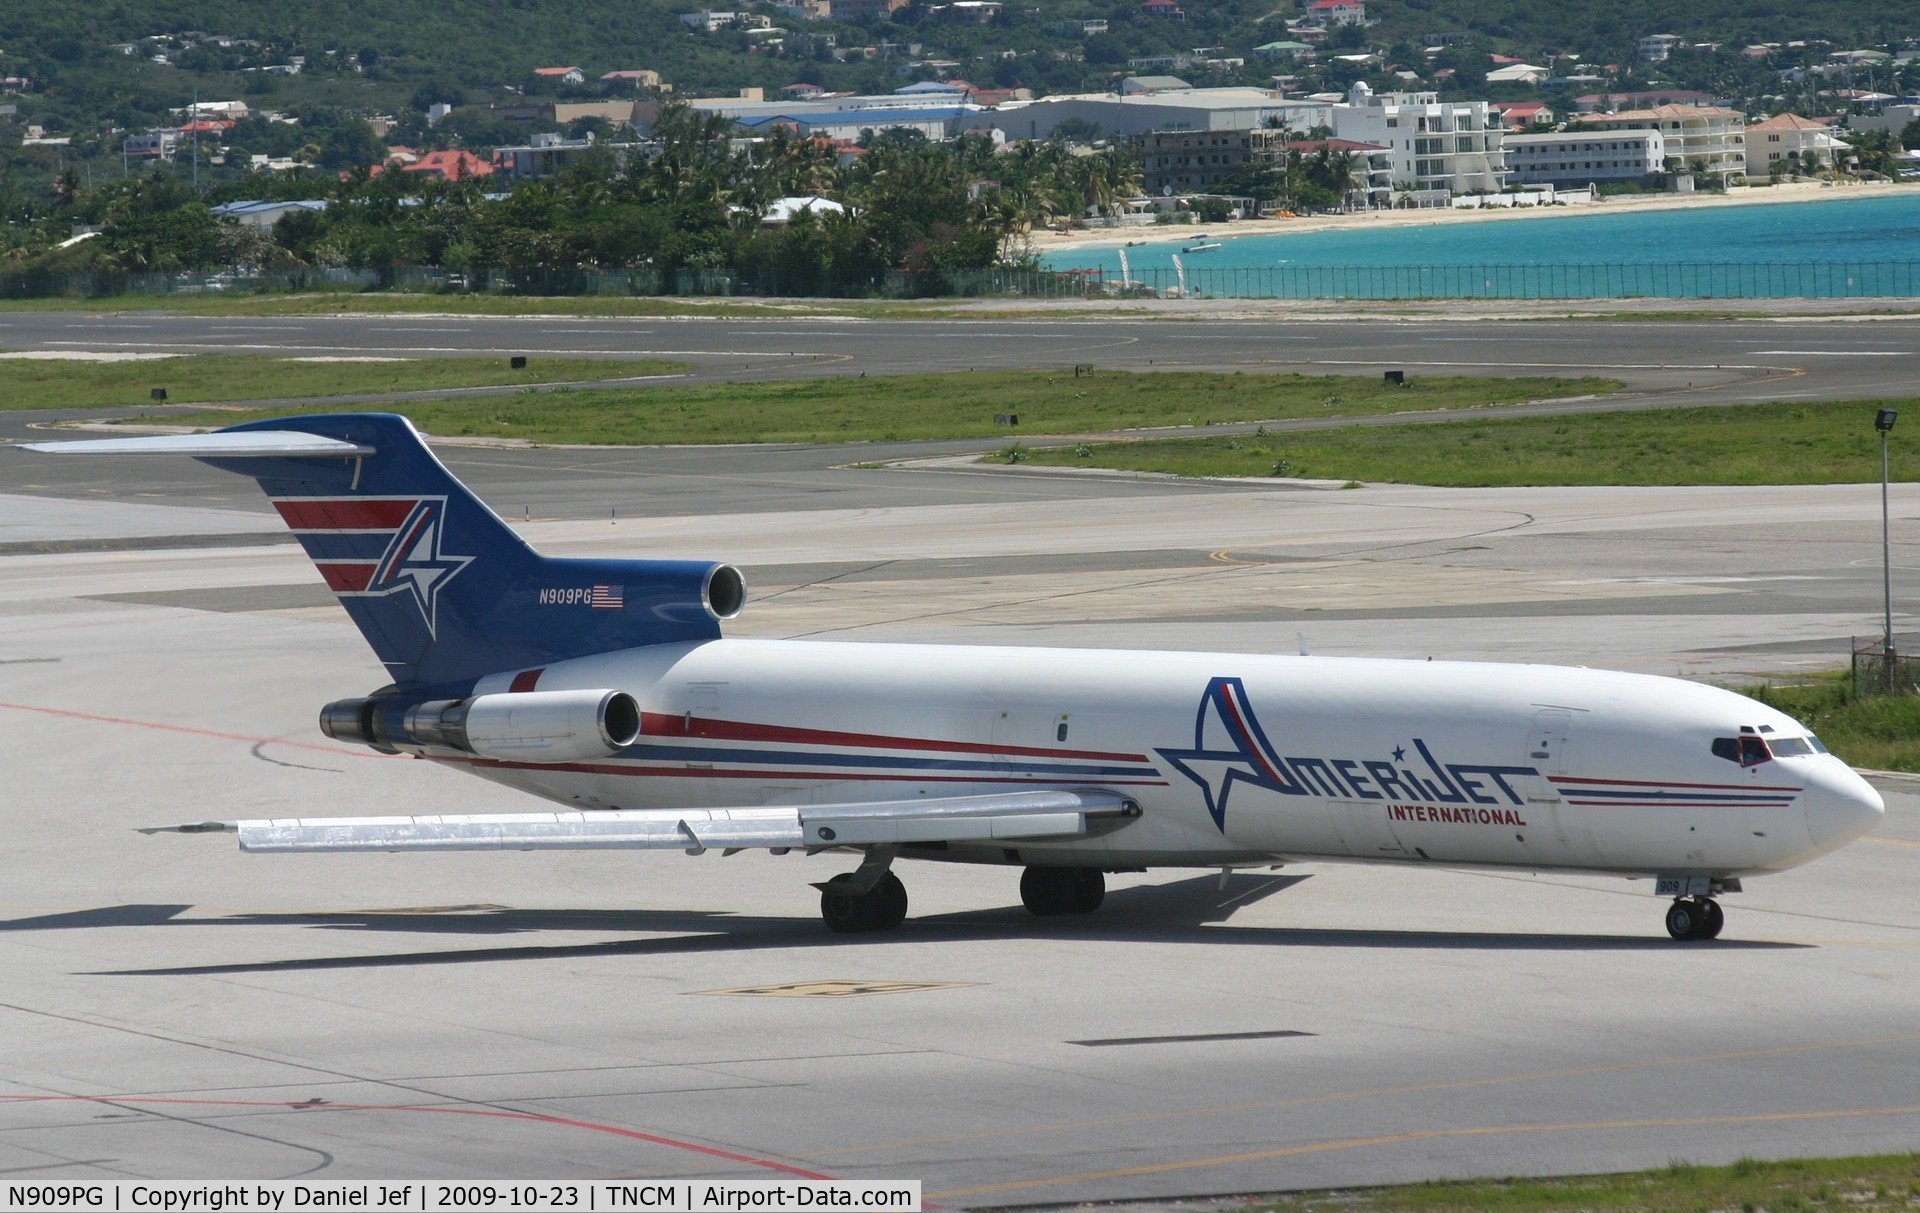 N909PG, 1979 Boeing 727-2K5 C/N 21852, taxing to holding point A